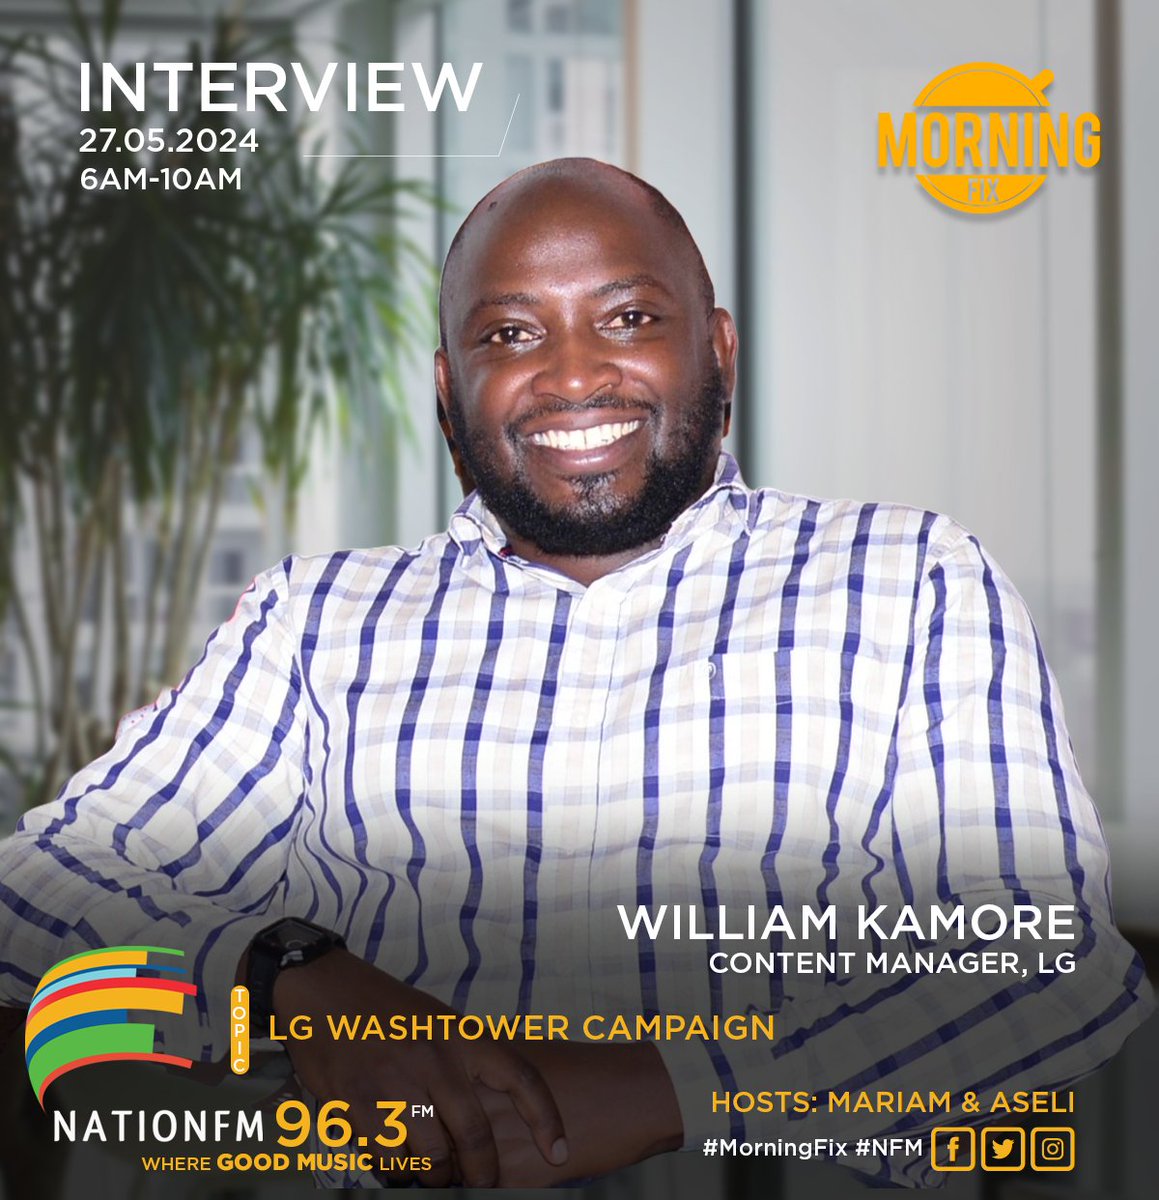 Don't miss out! Tune in to NationFM 96.3 on May 27th, 2024, from 6 AM to 10 AM for an exclusive interview with William Kamore, Content Manager at LG, discussing the exciting LG WashTower Campaign. Hosted by Mariam & Aseli. #MorningFix #LGMorningFix #LIfesGood #LGEastAfrica